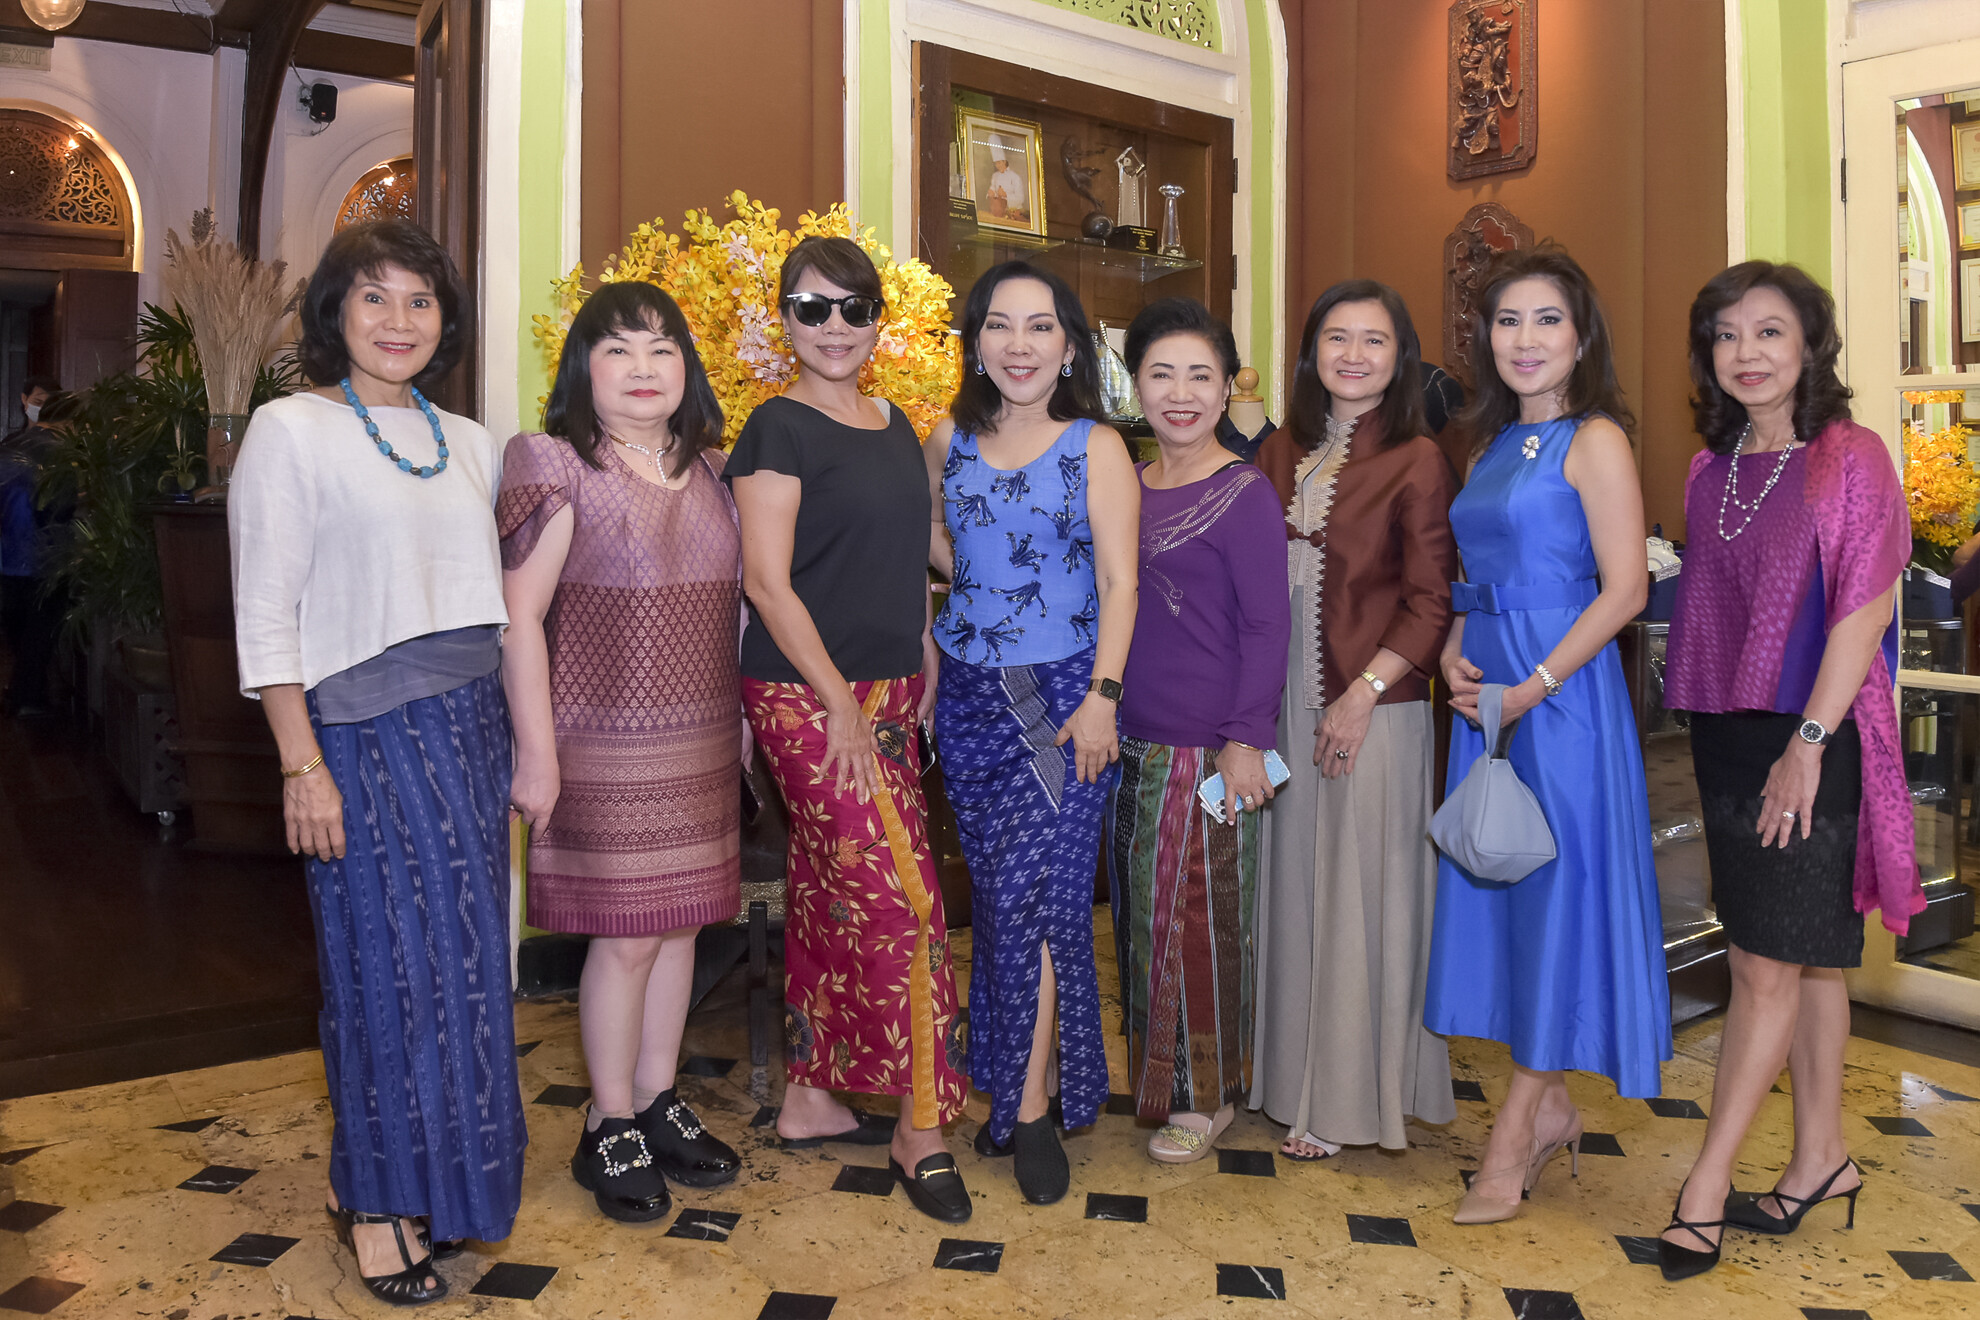 BLUE ELEPHANT COOKING SCHOOL &RESTAURANT BANGKOK WELCOMES MEMBERS OF POLO CLUB ZUMBA GROUP FOR A TASTE OF CHEF NOOROR SOMANY STEPPE'S HEALTH INSPIRED ROYAL THAI CUISINE